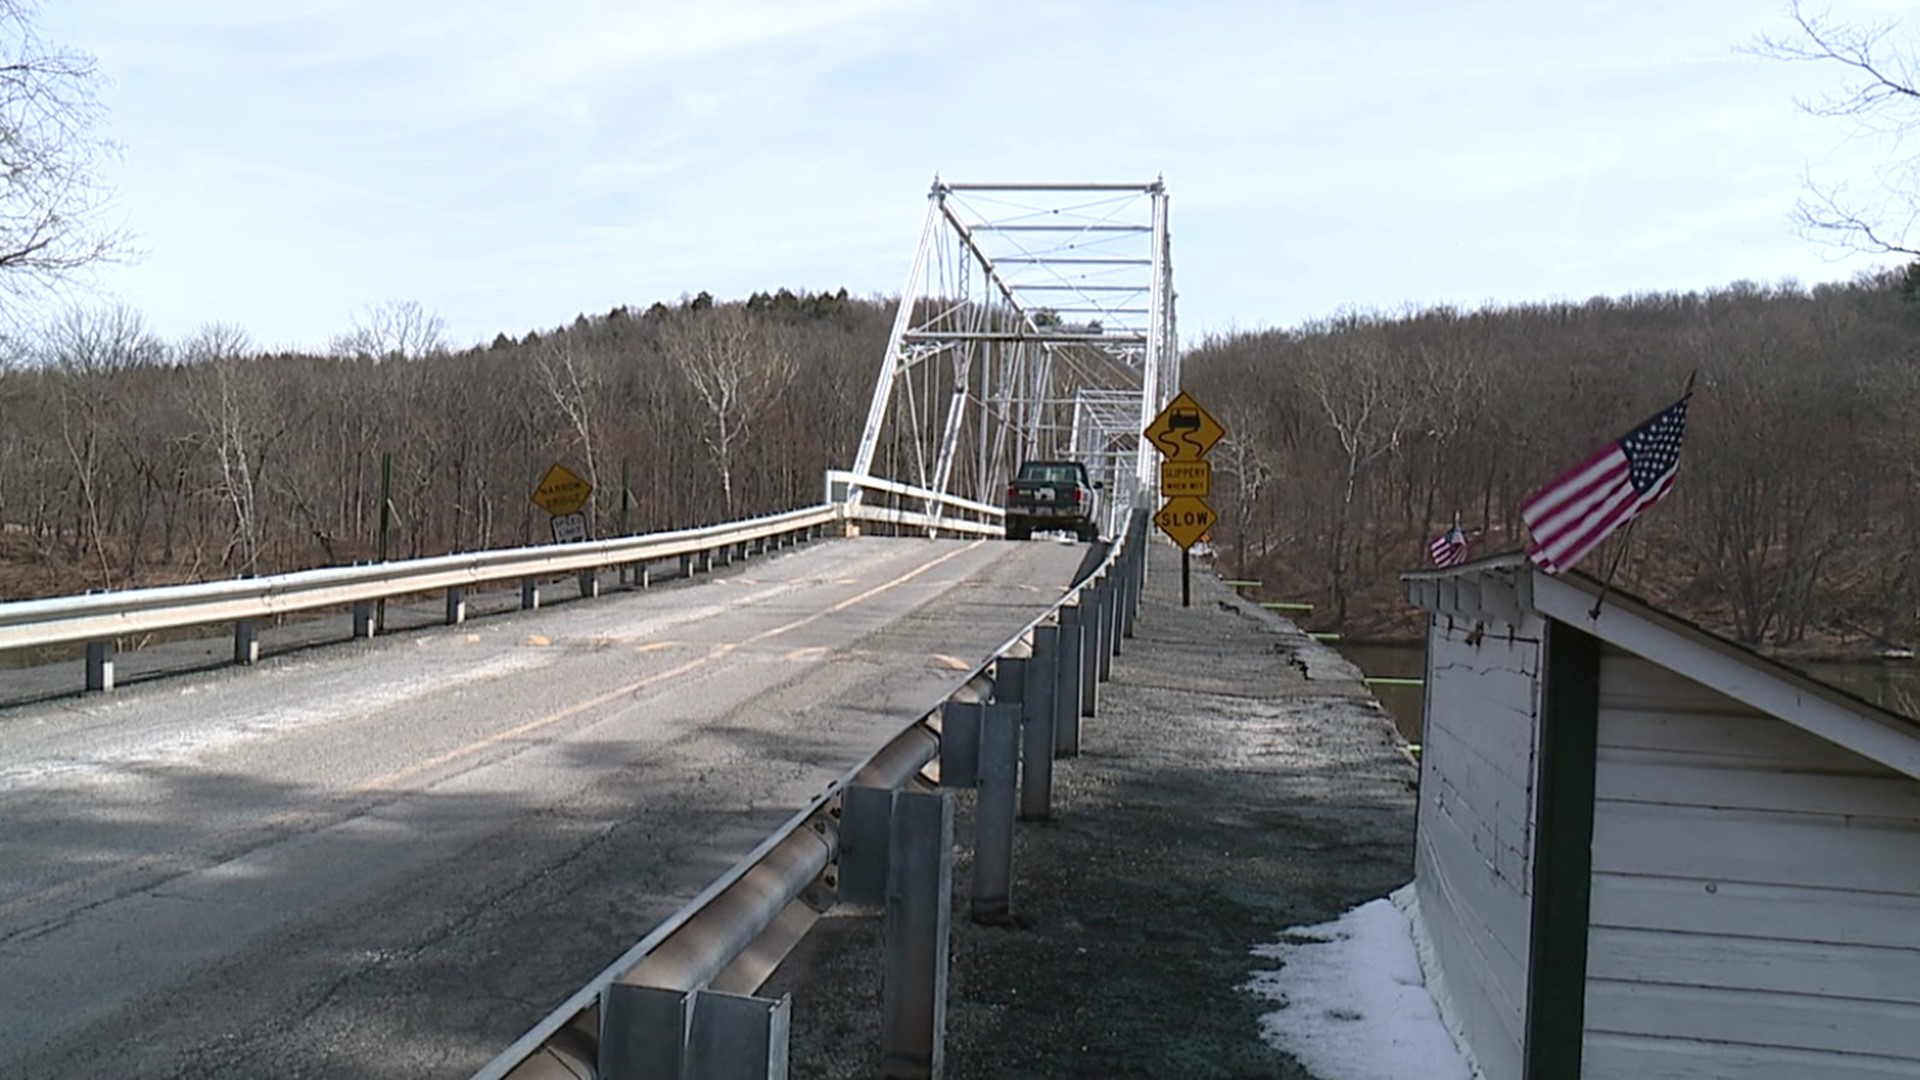 The Dingmans Bridge over the Delaware River is one of the only privately-owned toll bridges in the country, an escape from our E-ZPass world.